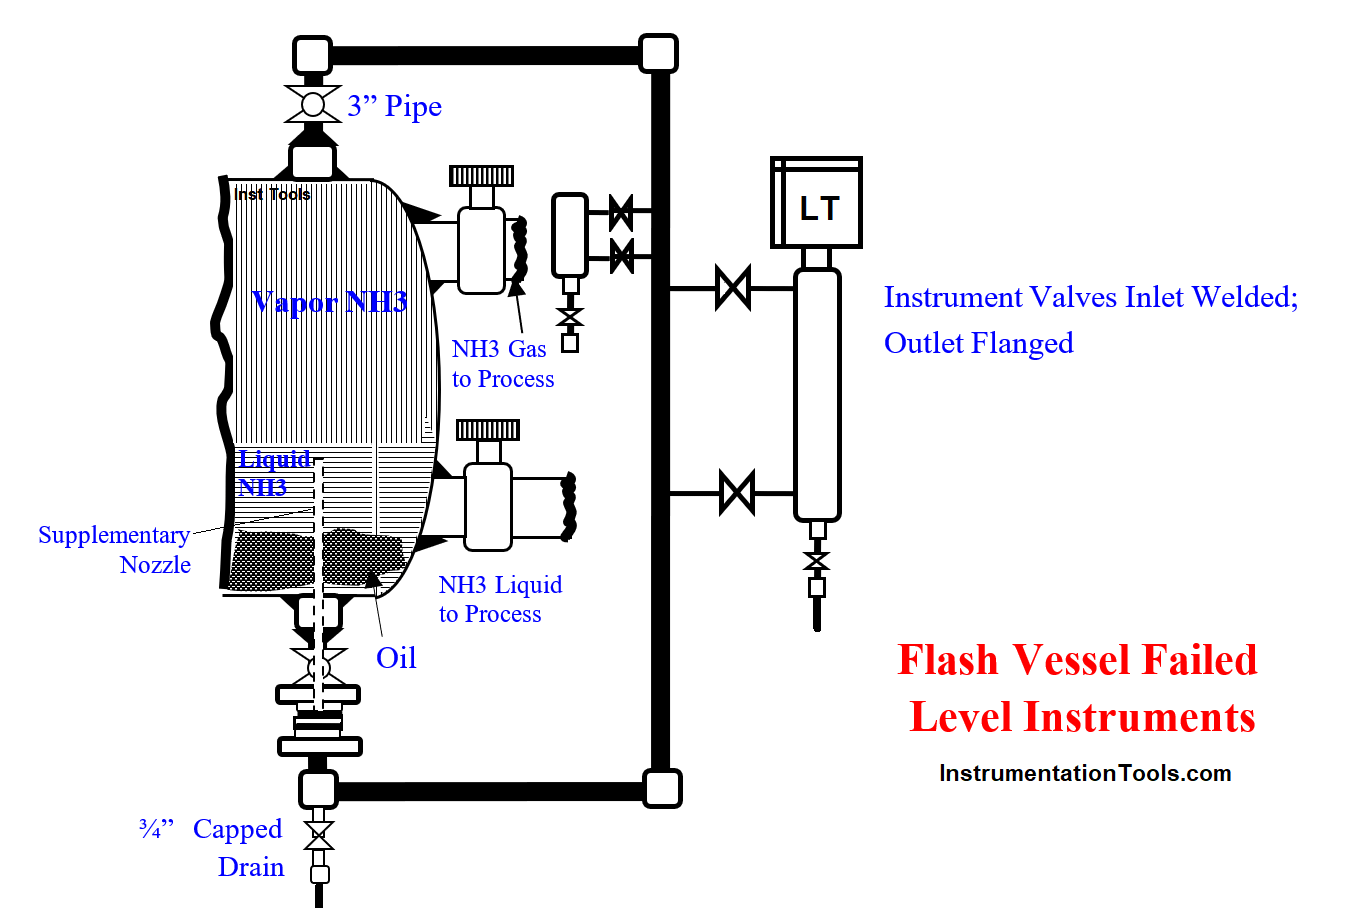 Flash Vessel All Level Instruments Stopped Working